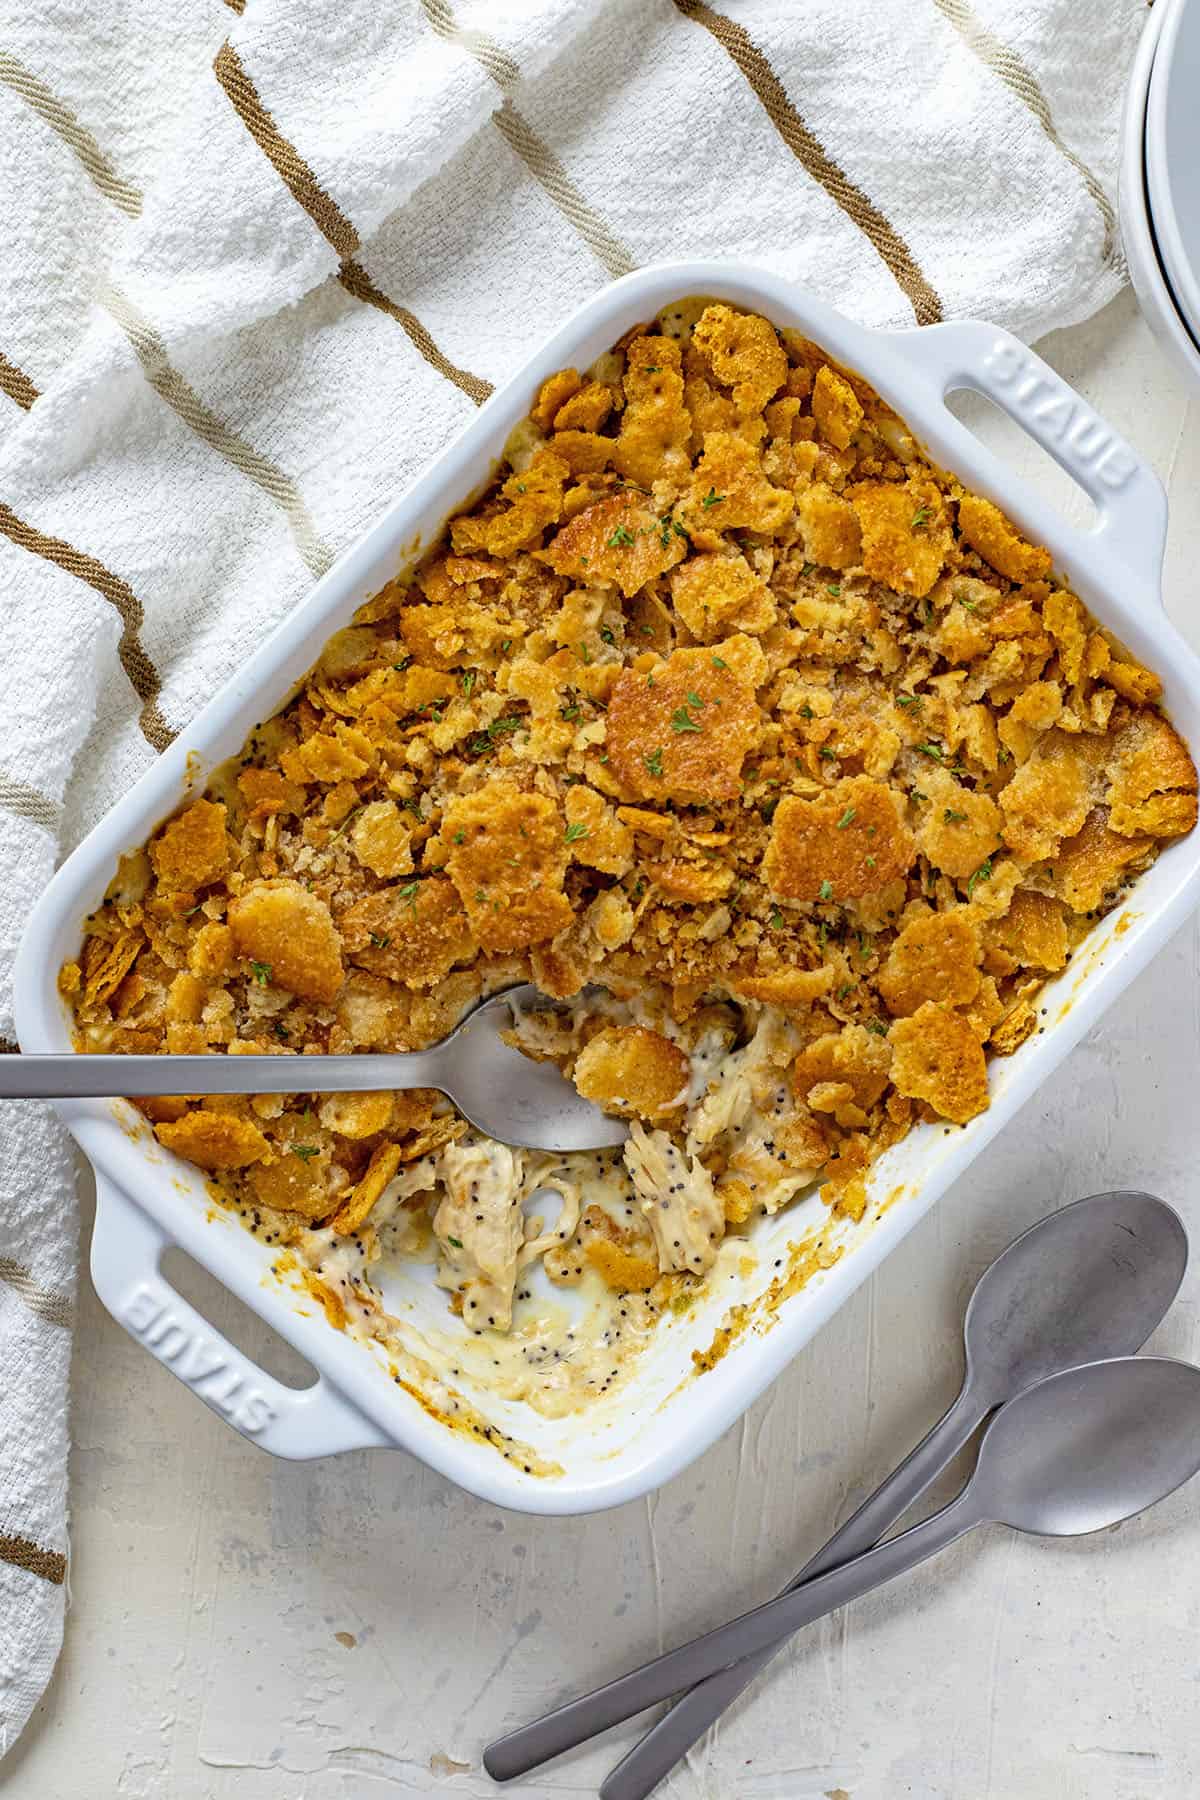 baked casserole in a white oblong dish with one serving removed and spoons on the side